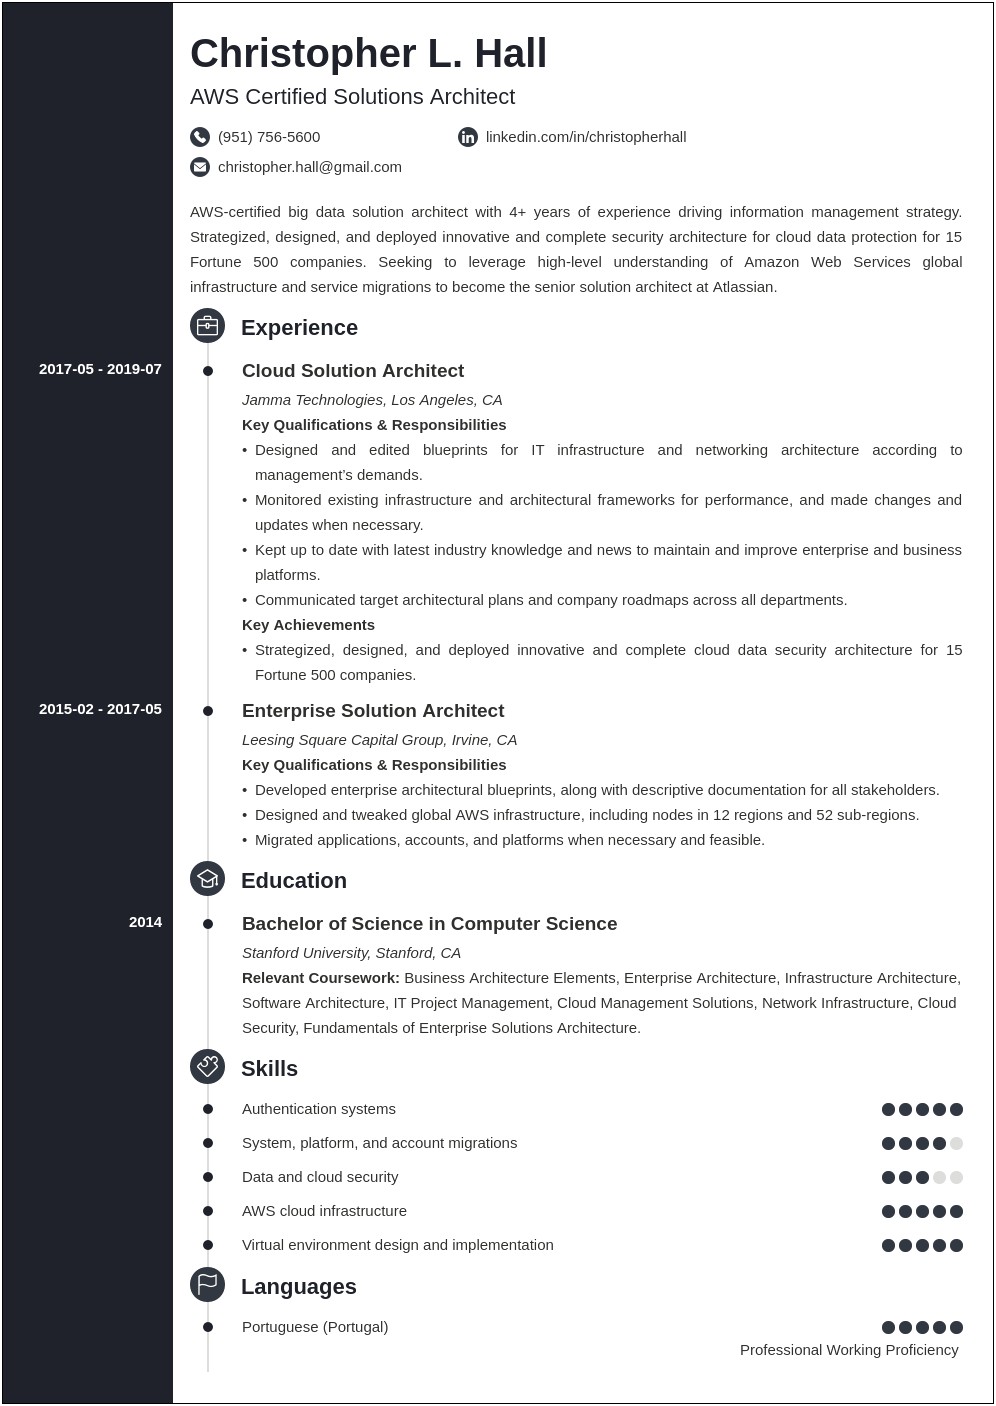 Business Solutions Architect Sample Resume